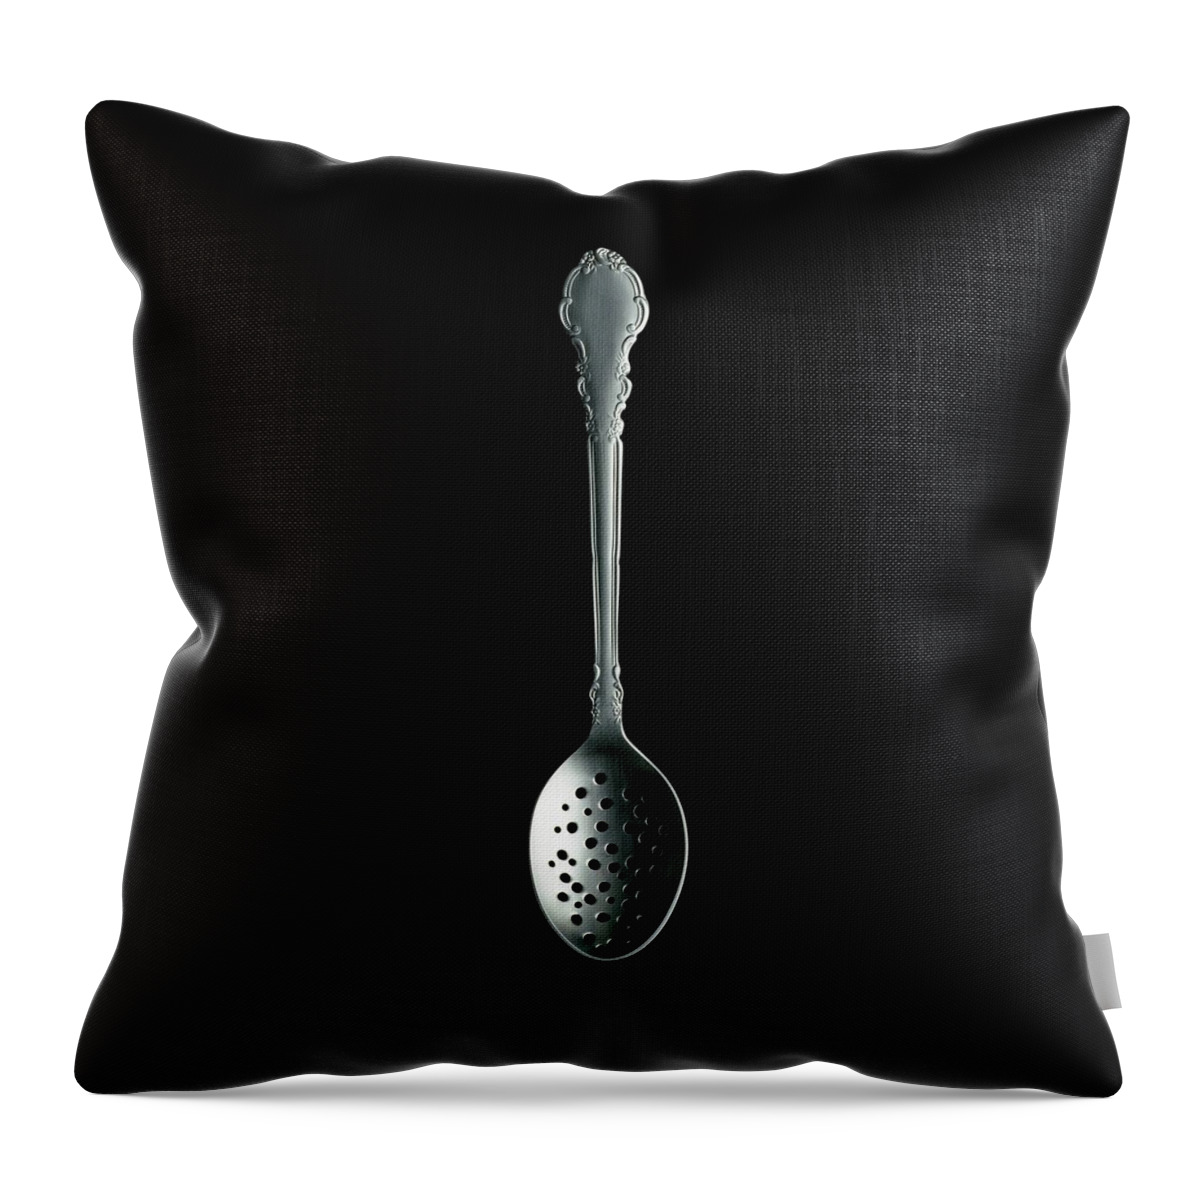 A Slotted Spoon Throw Pillow